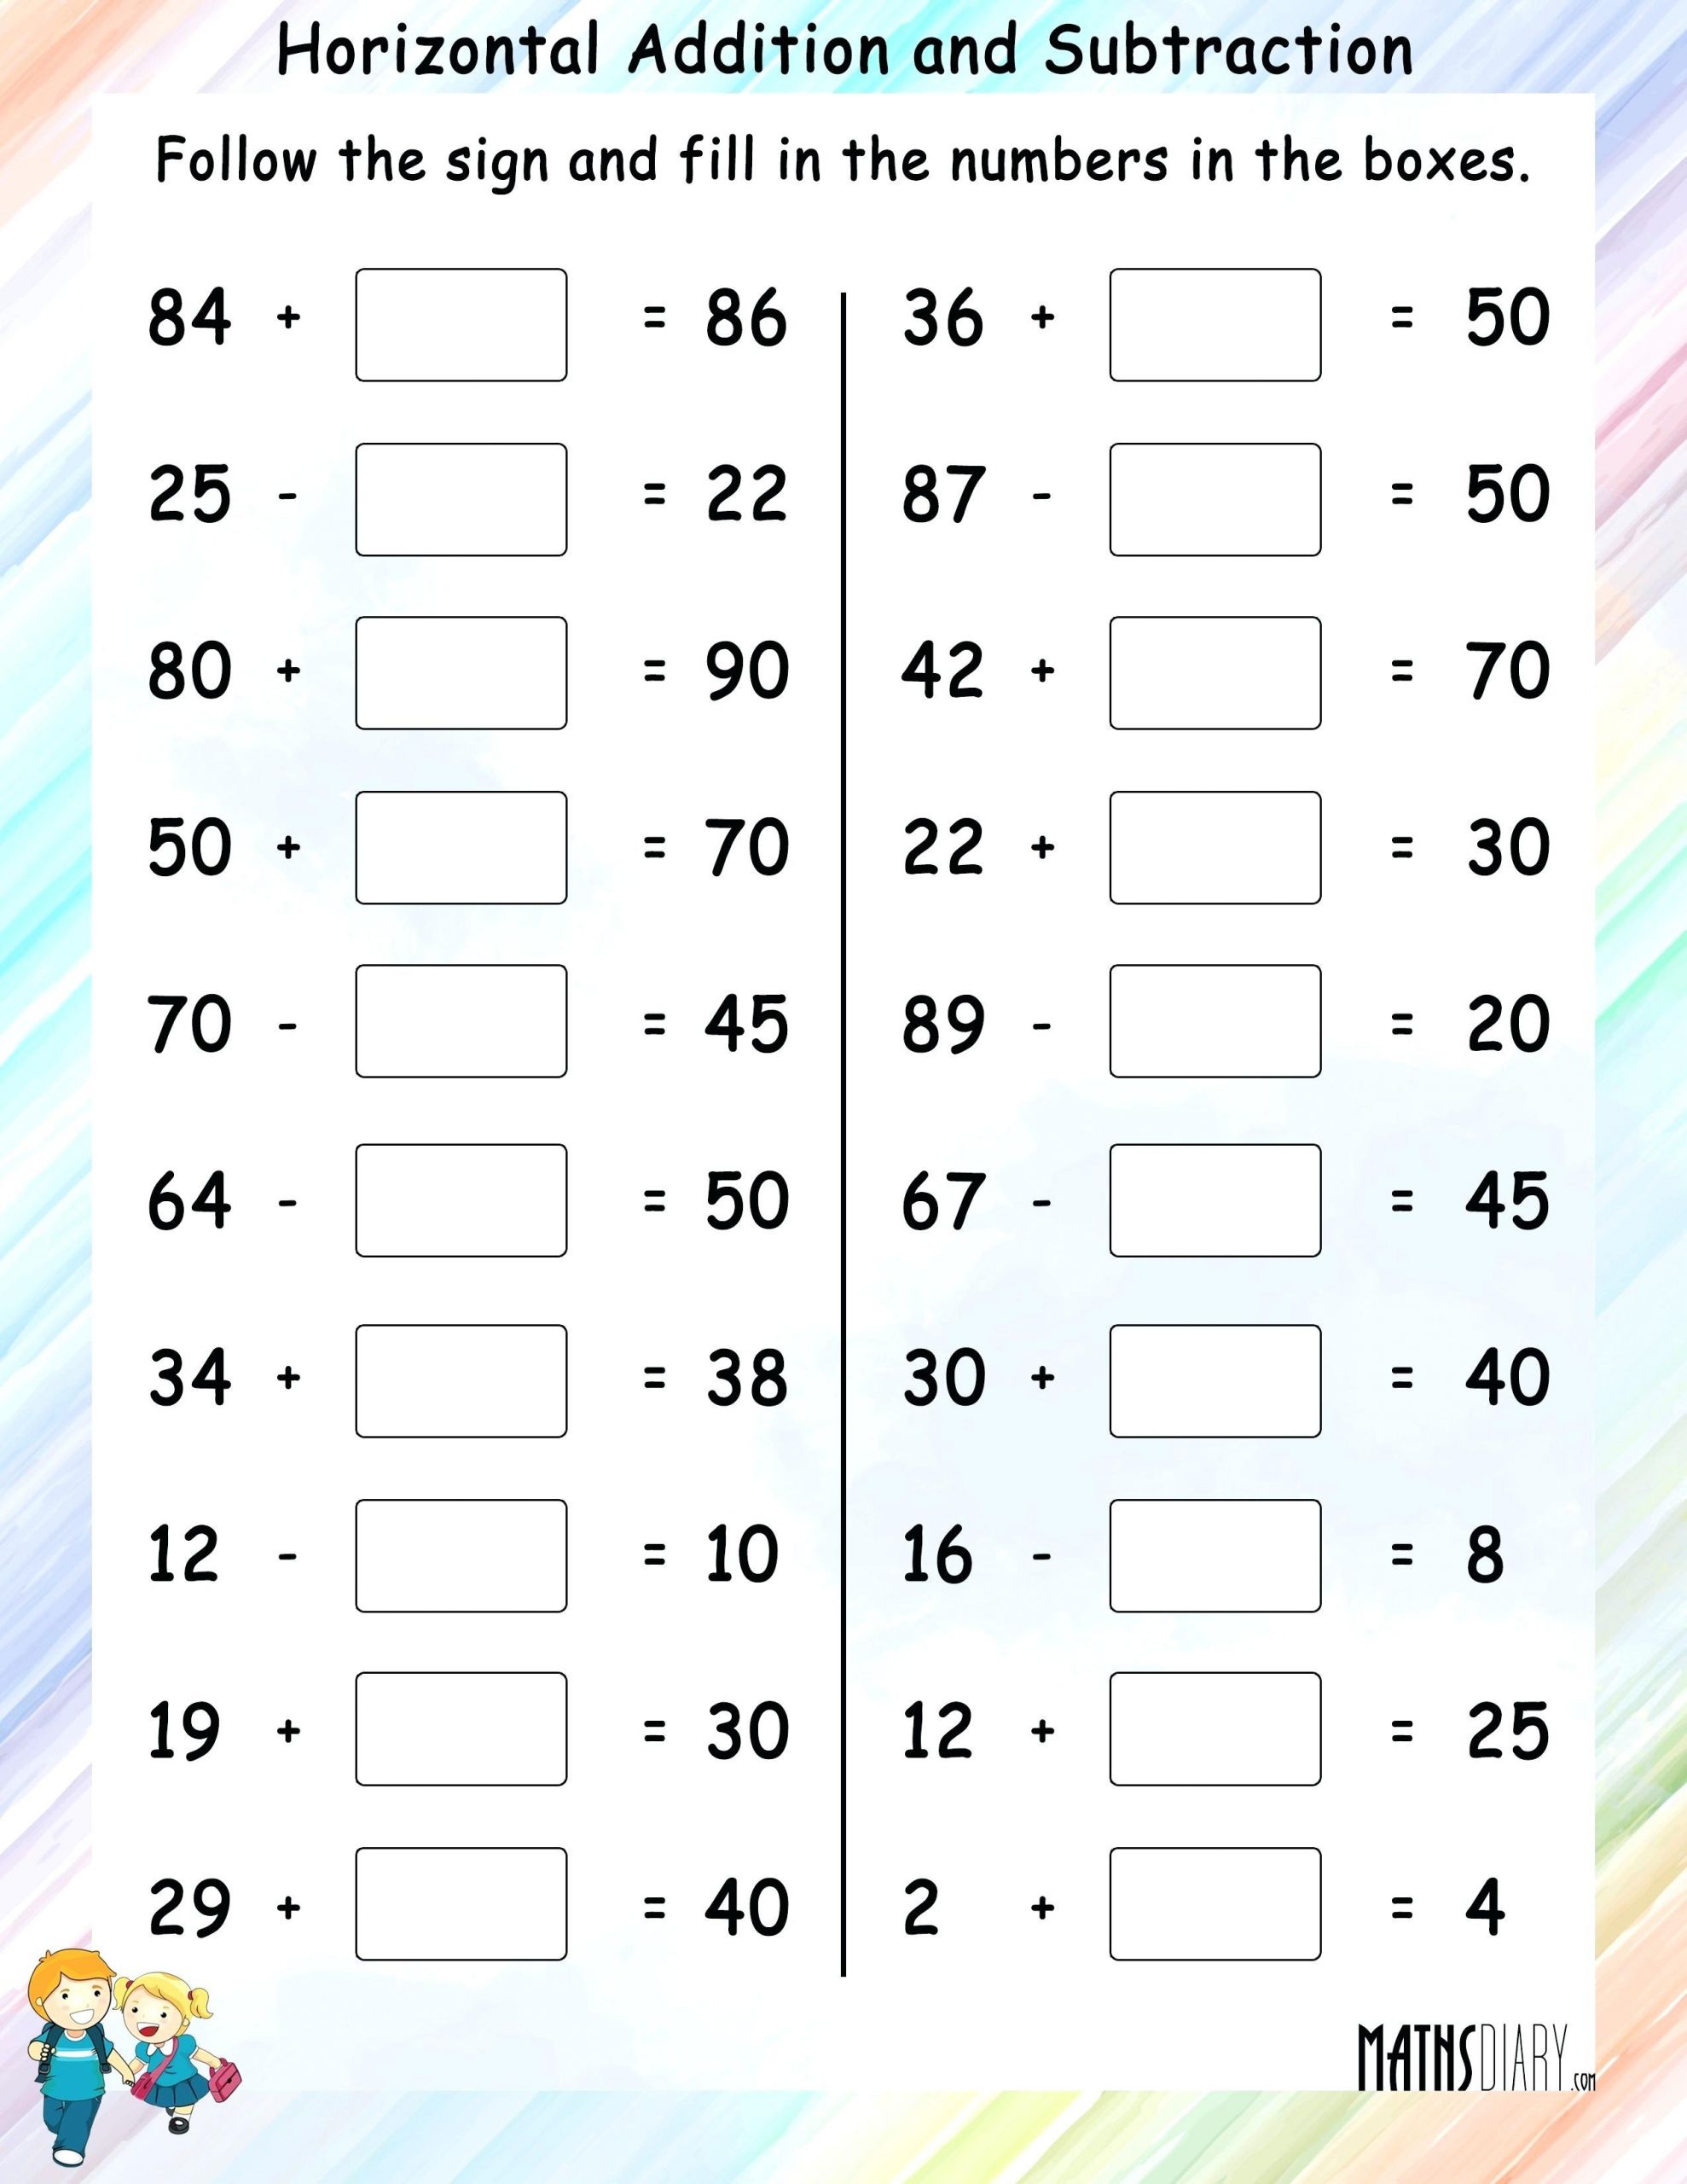 Free Math Worksheets Second Grade 2 Addition Add In Columns Missing Addend